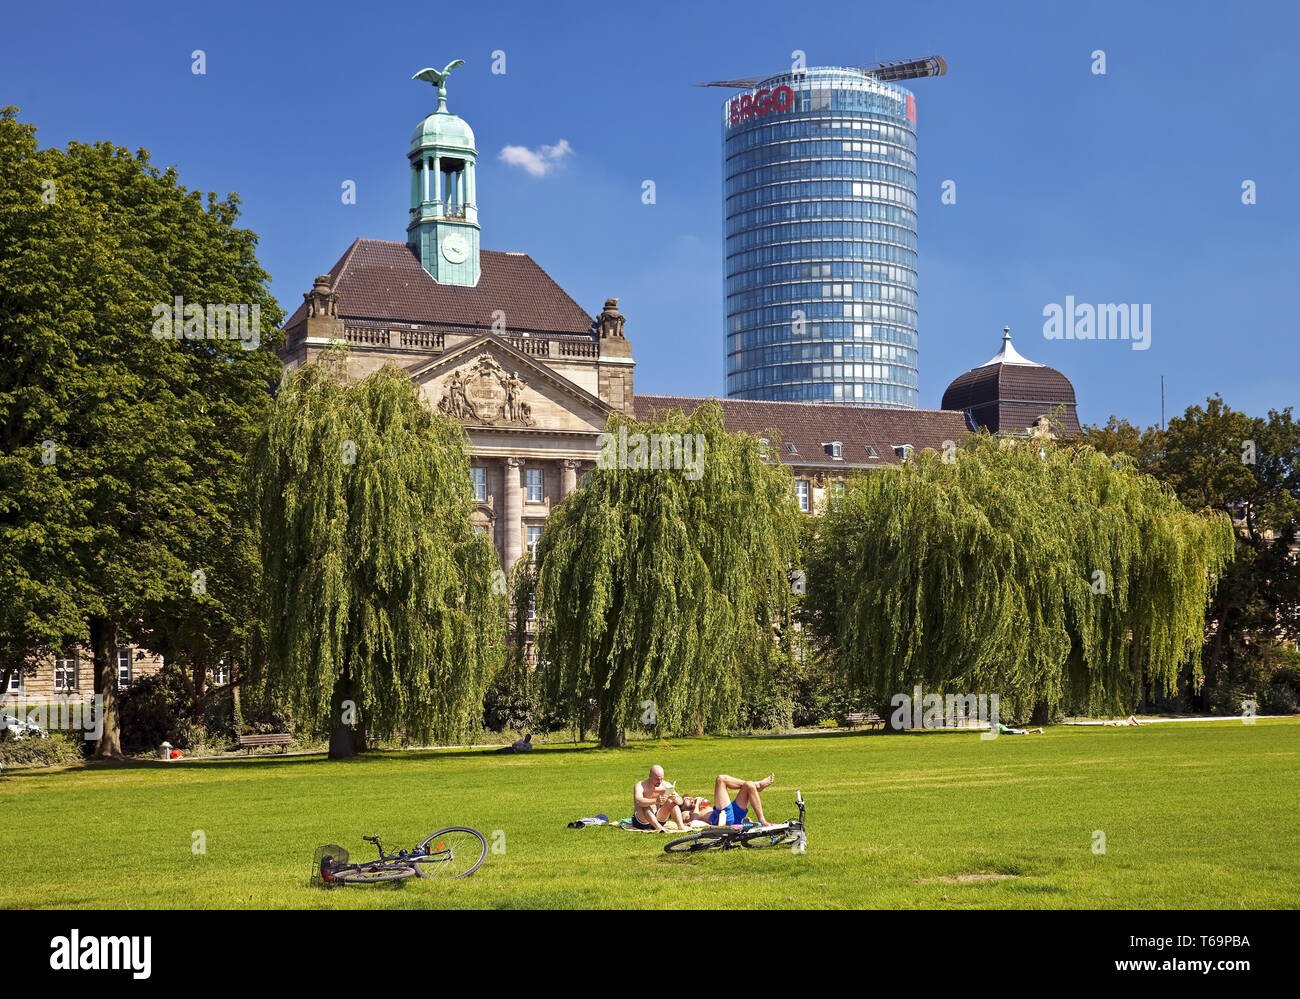 rhine meadow in front of the legislature building and the Ergo office tower, Duesseldorf, Germany Stock Photo